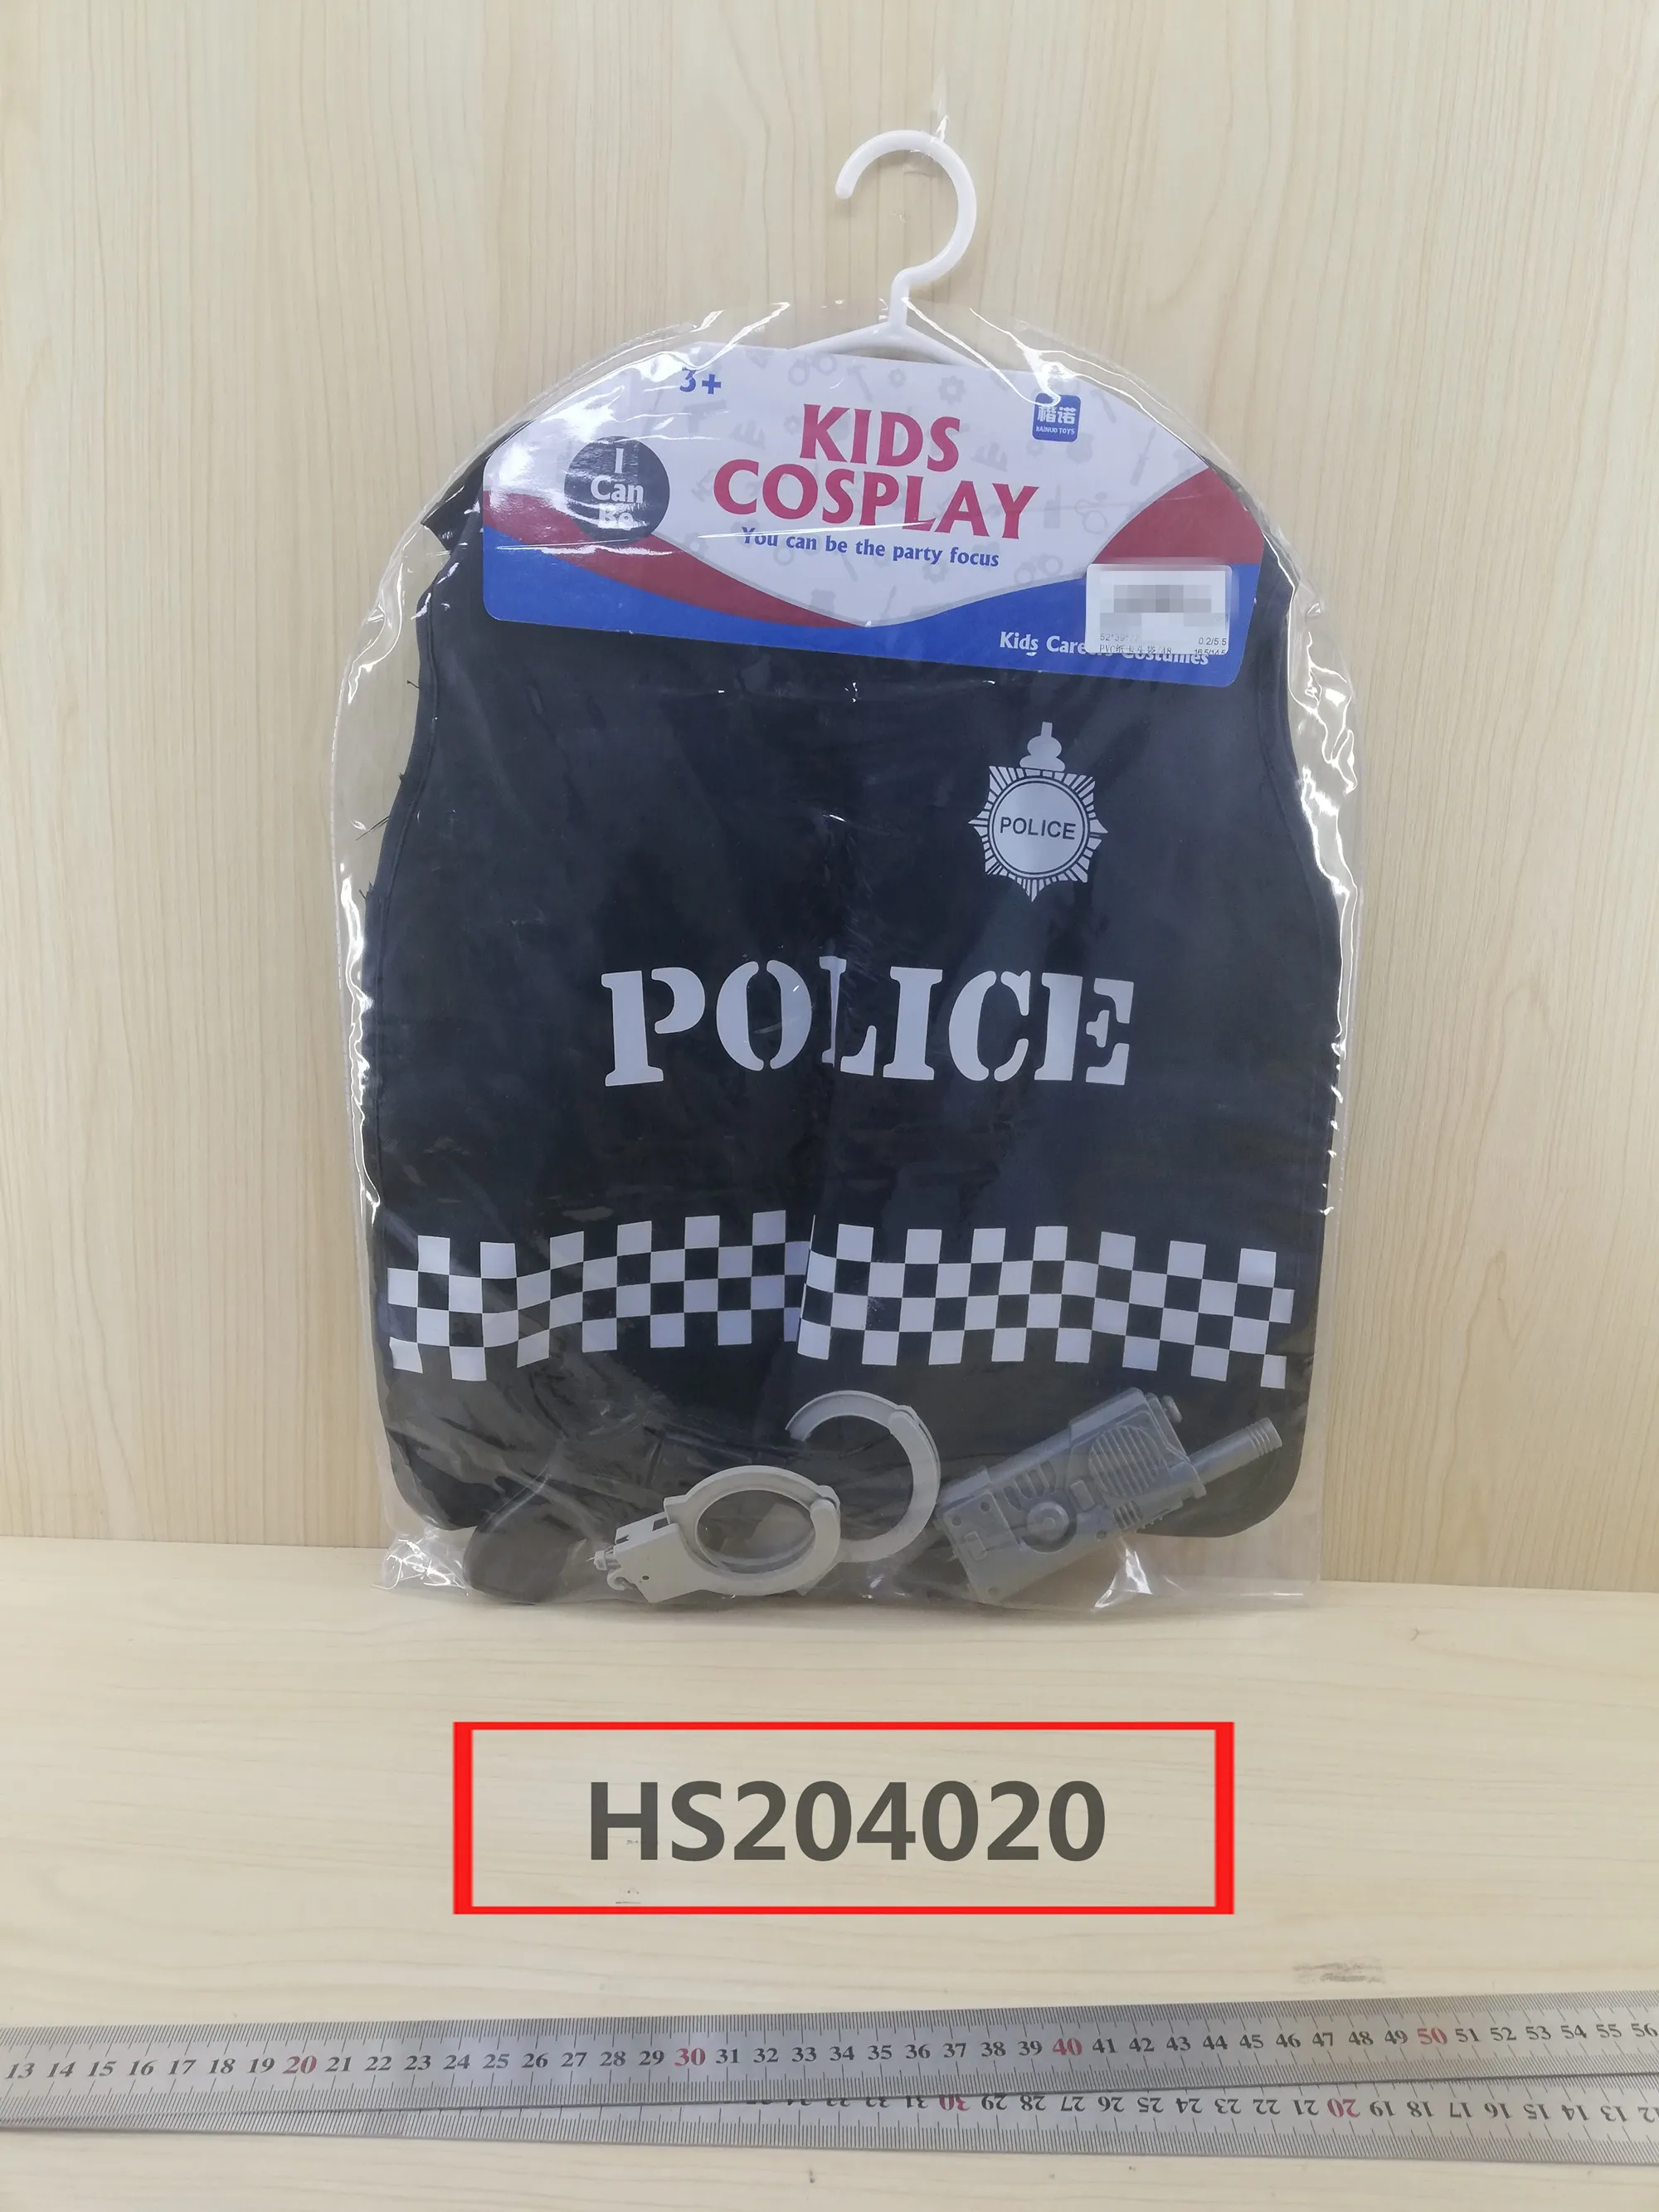 HS204020, Huwsin Toys, Kids cosplay,Pretend play toy,Police play set